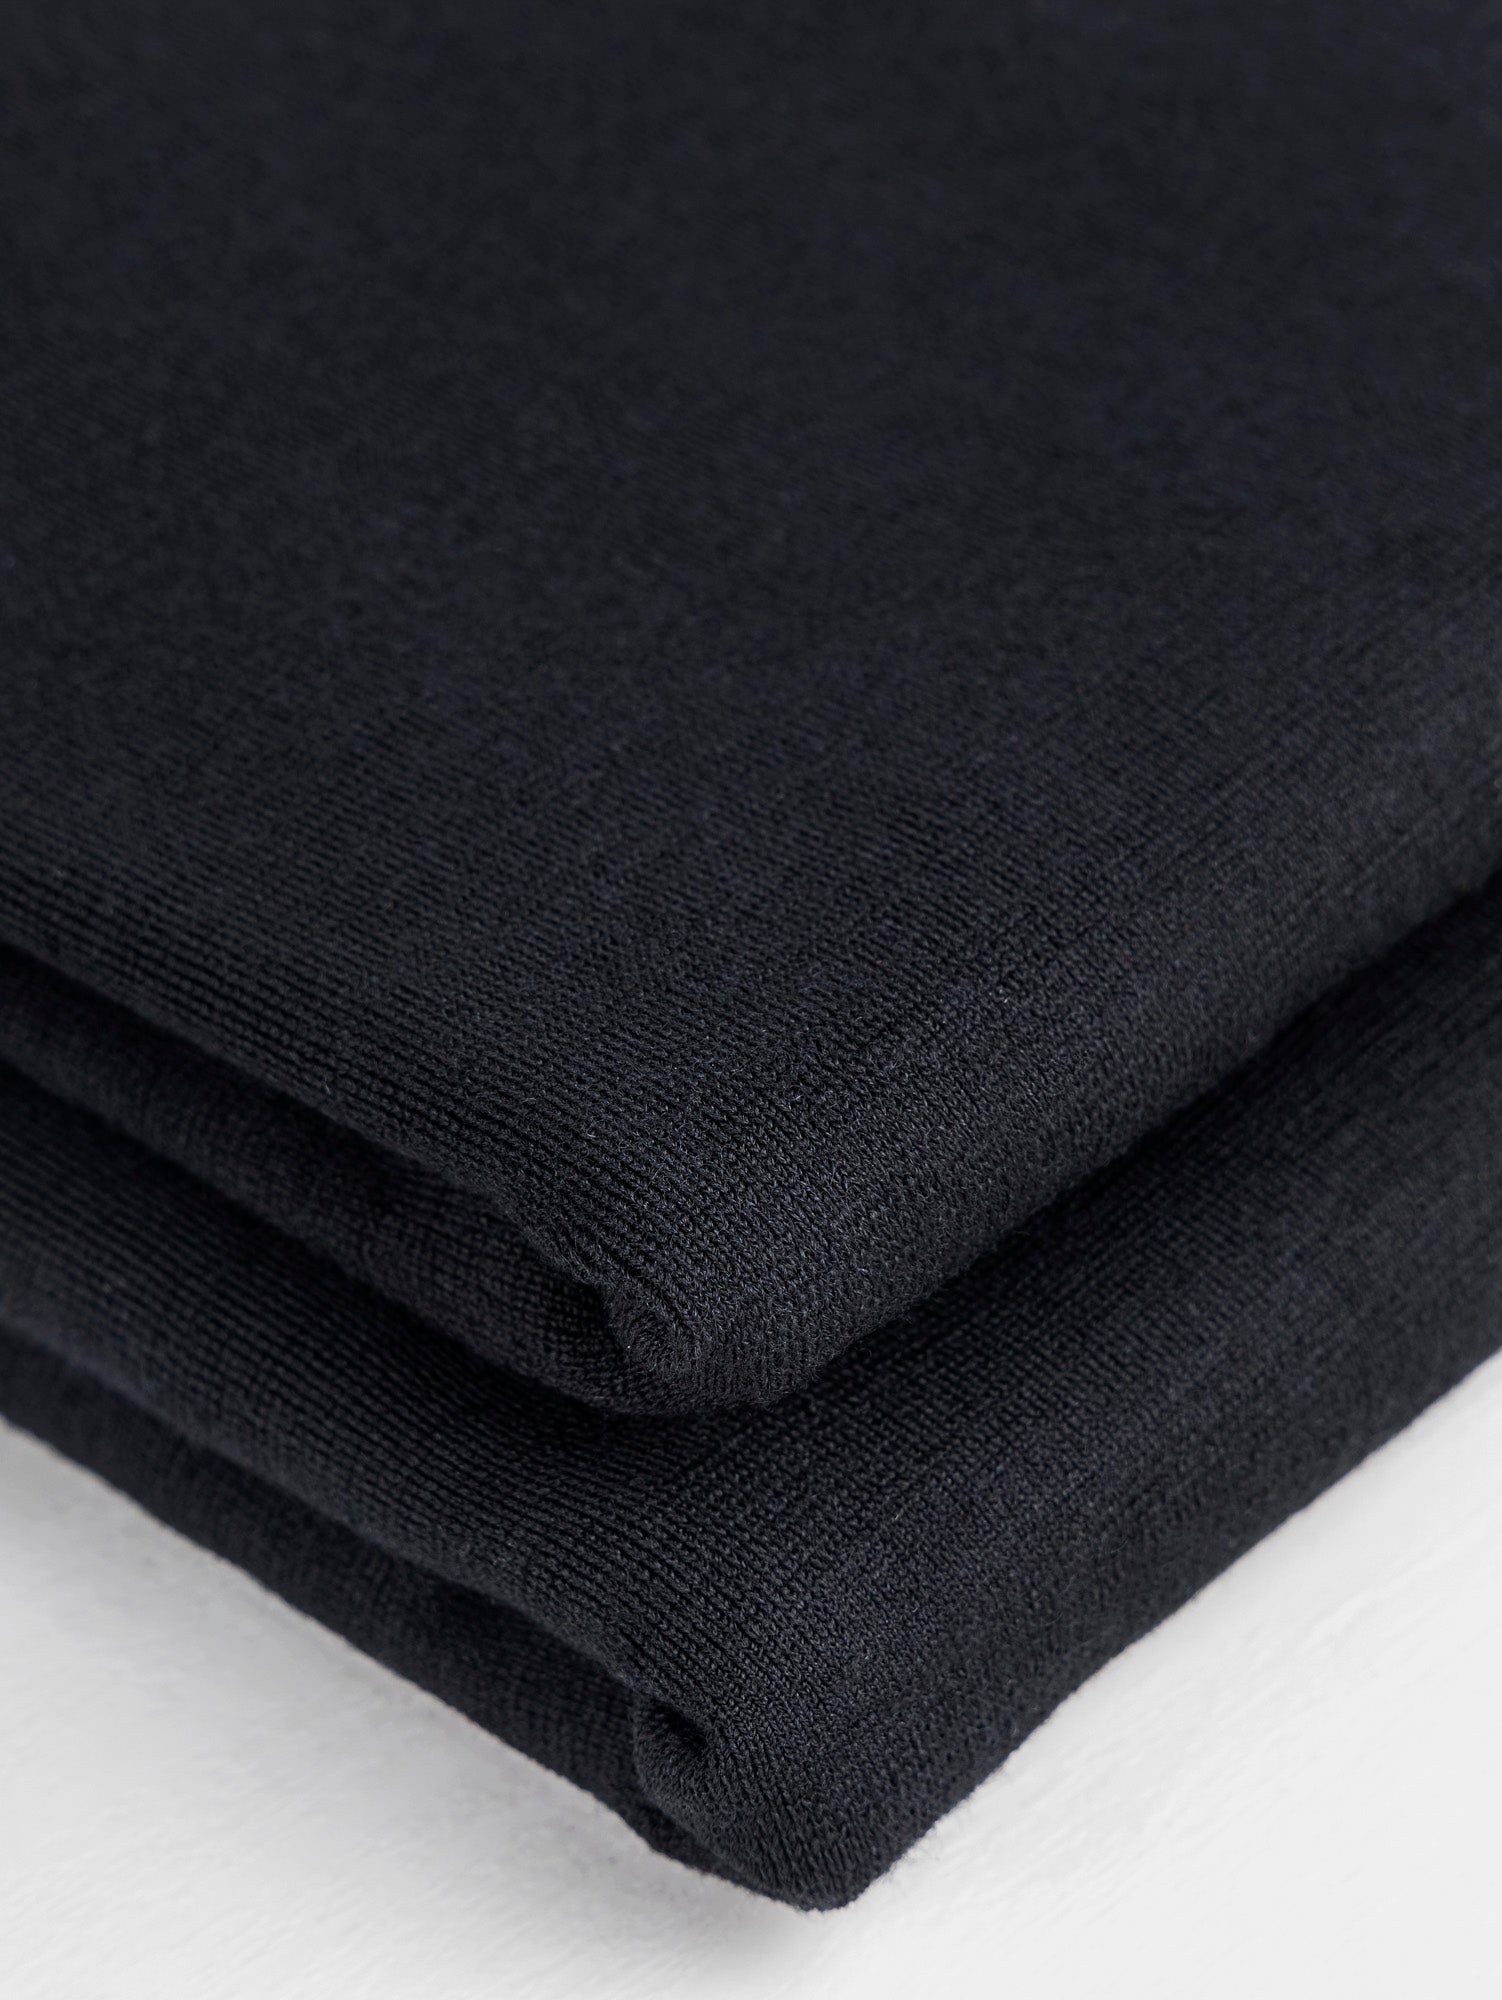  Charcoal Gray Heavy Weight Wool Blend Fabric (Charcoal Gray)